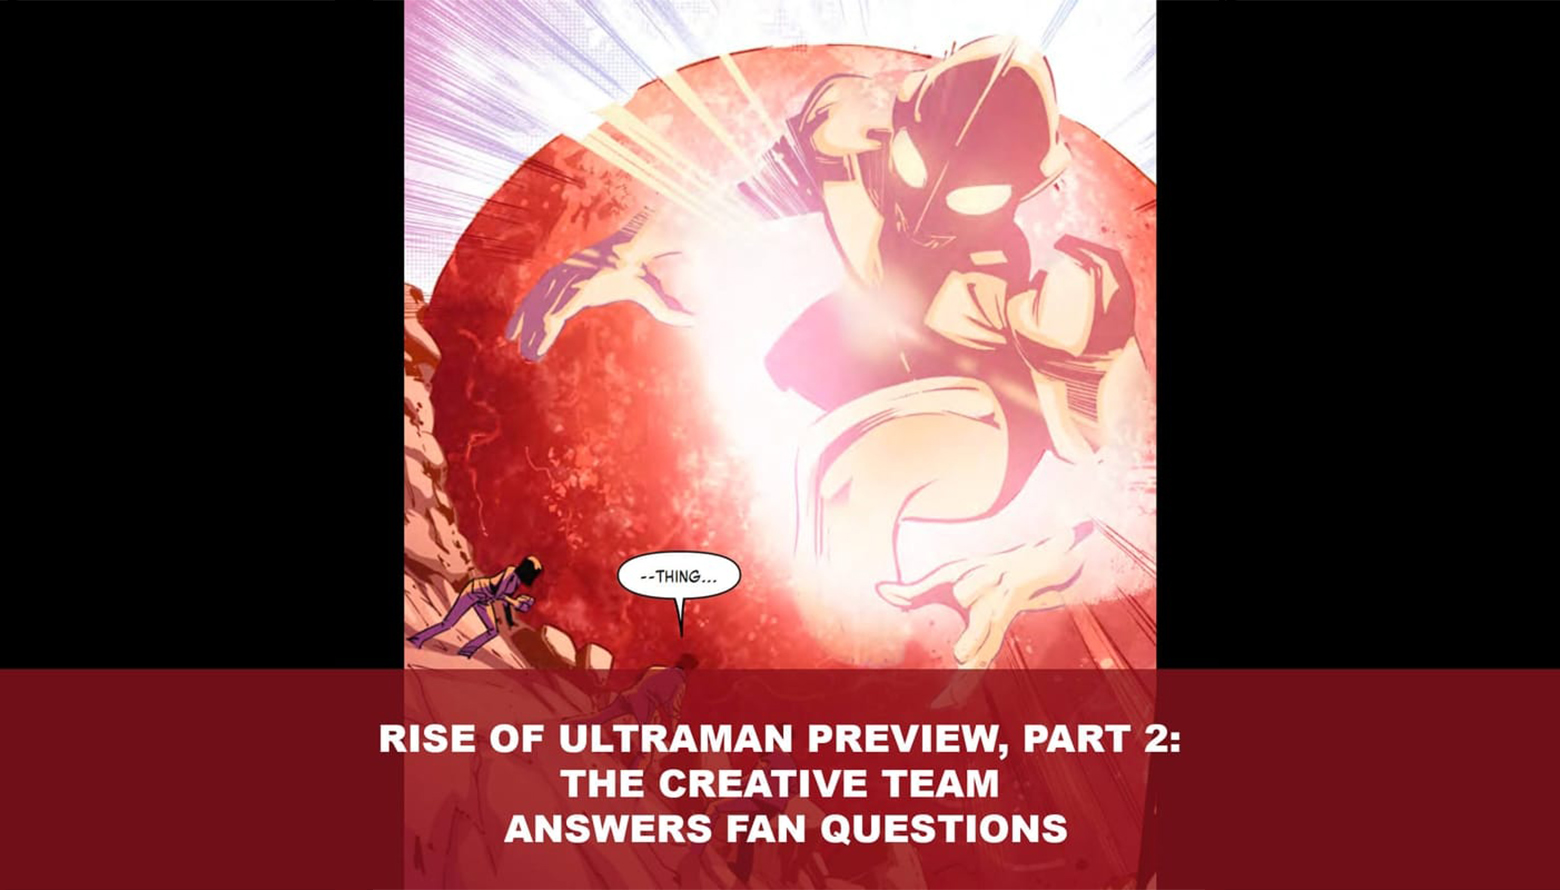 RISE OF ULTRAMAN PREVIEW, PART 2:THE CREATIVE TEAM ANSWERS FAN QUESTIONS